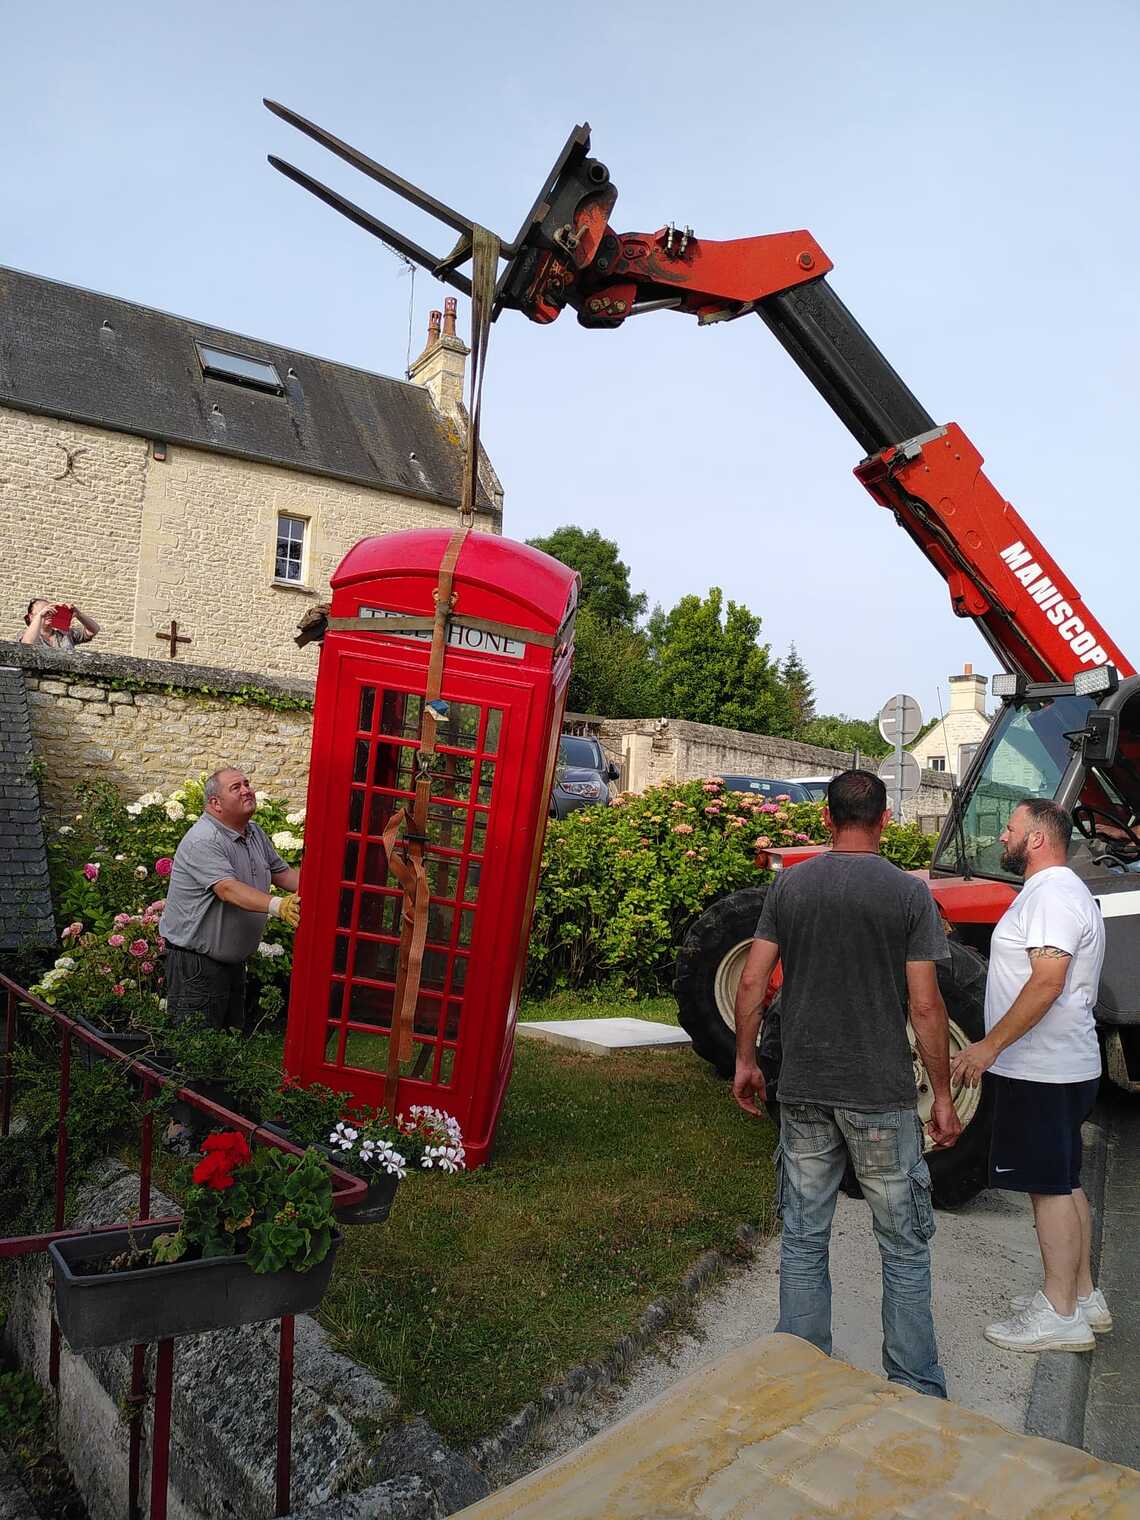 The restored GPO telephone box in its new home in Normandy